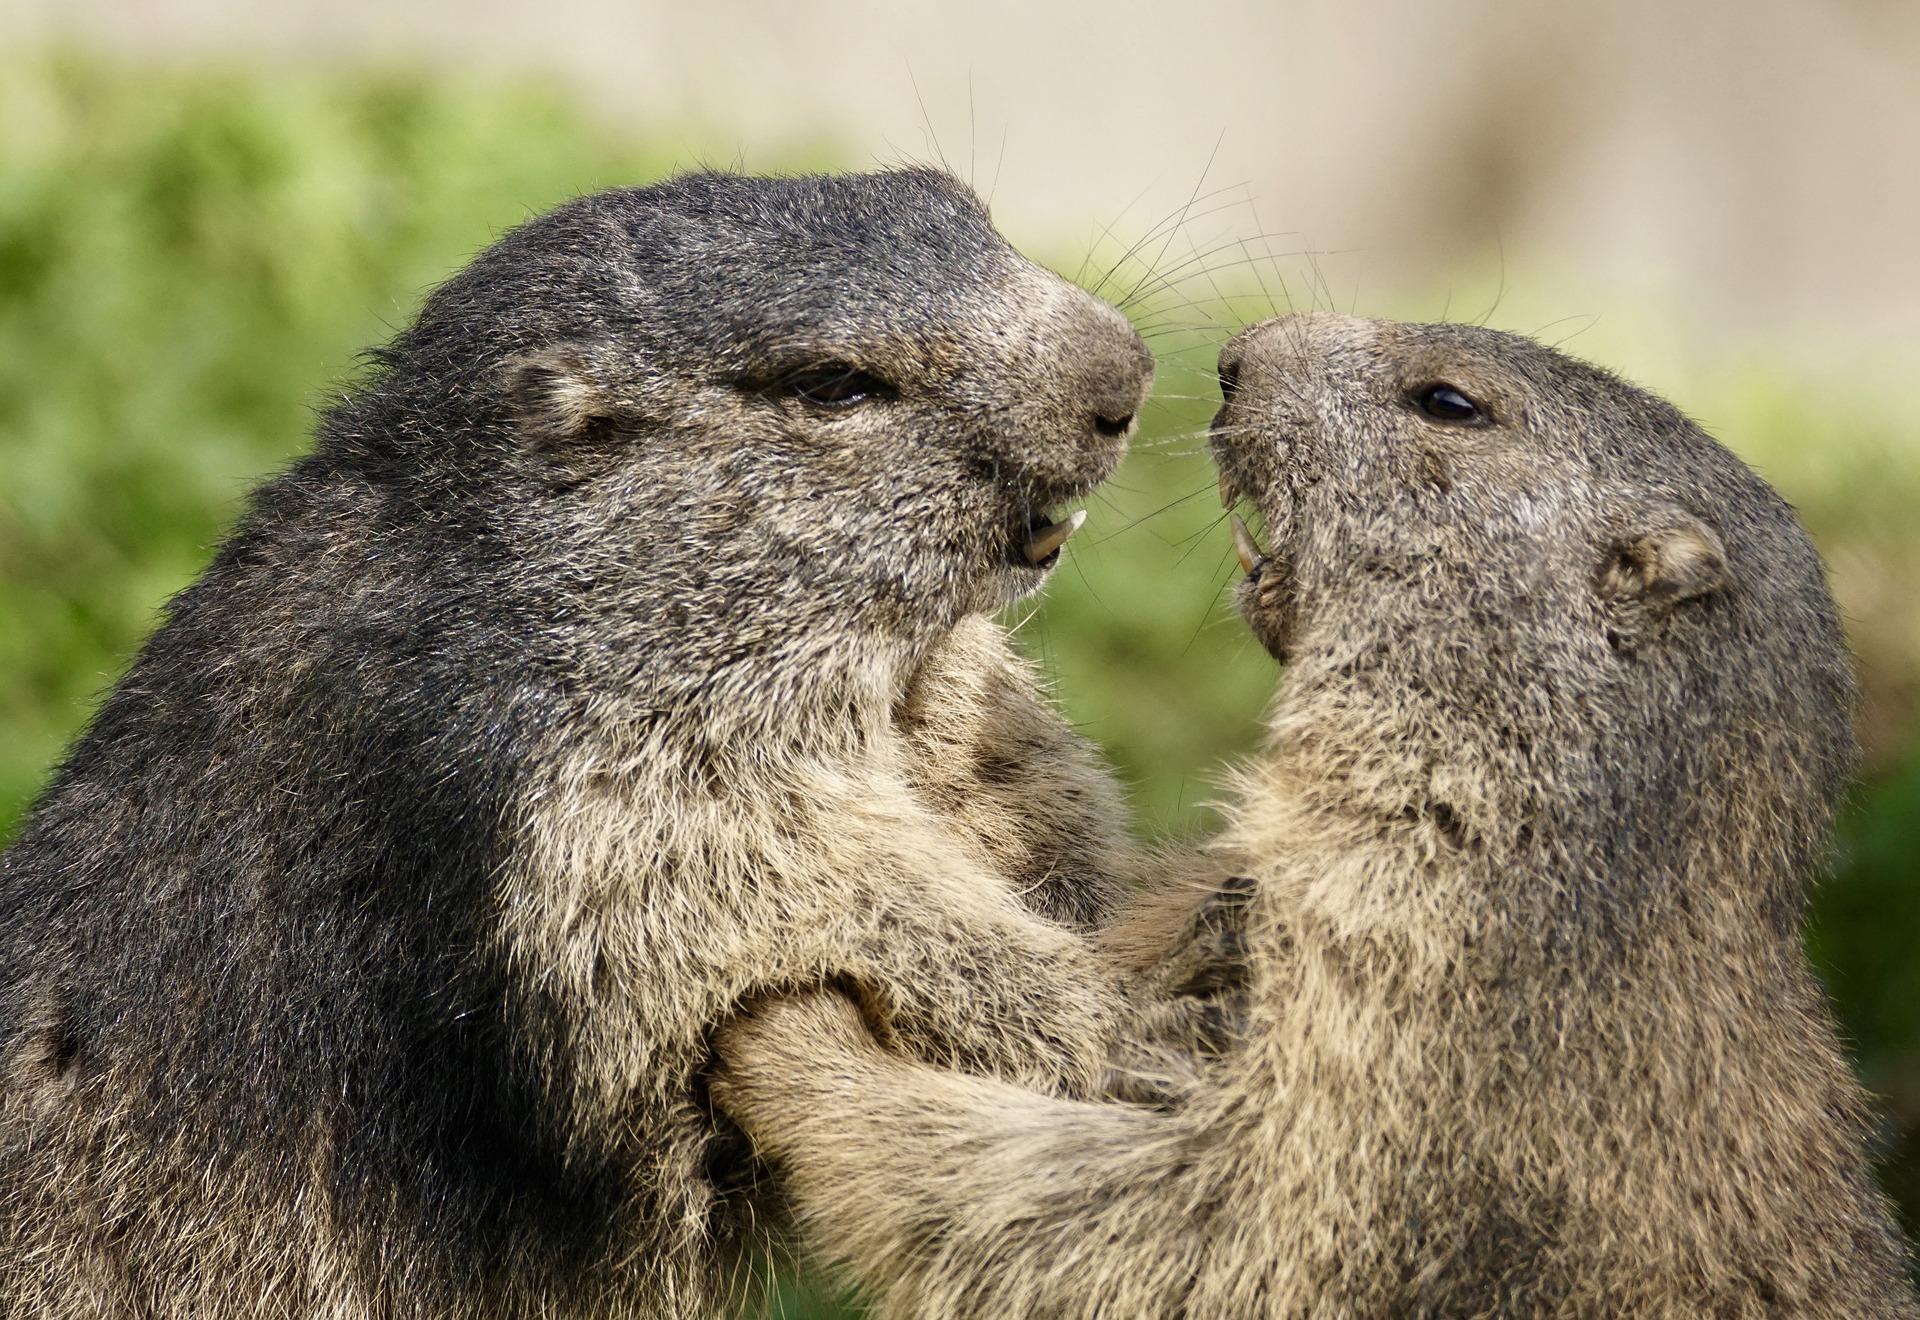 Marmot Wallpaper HD for Android